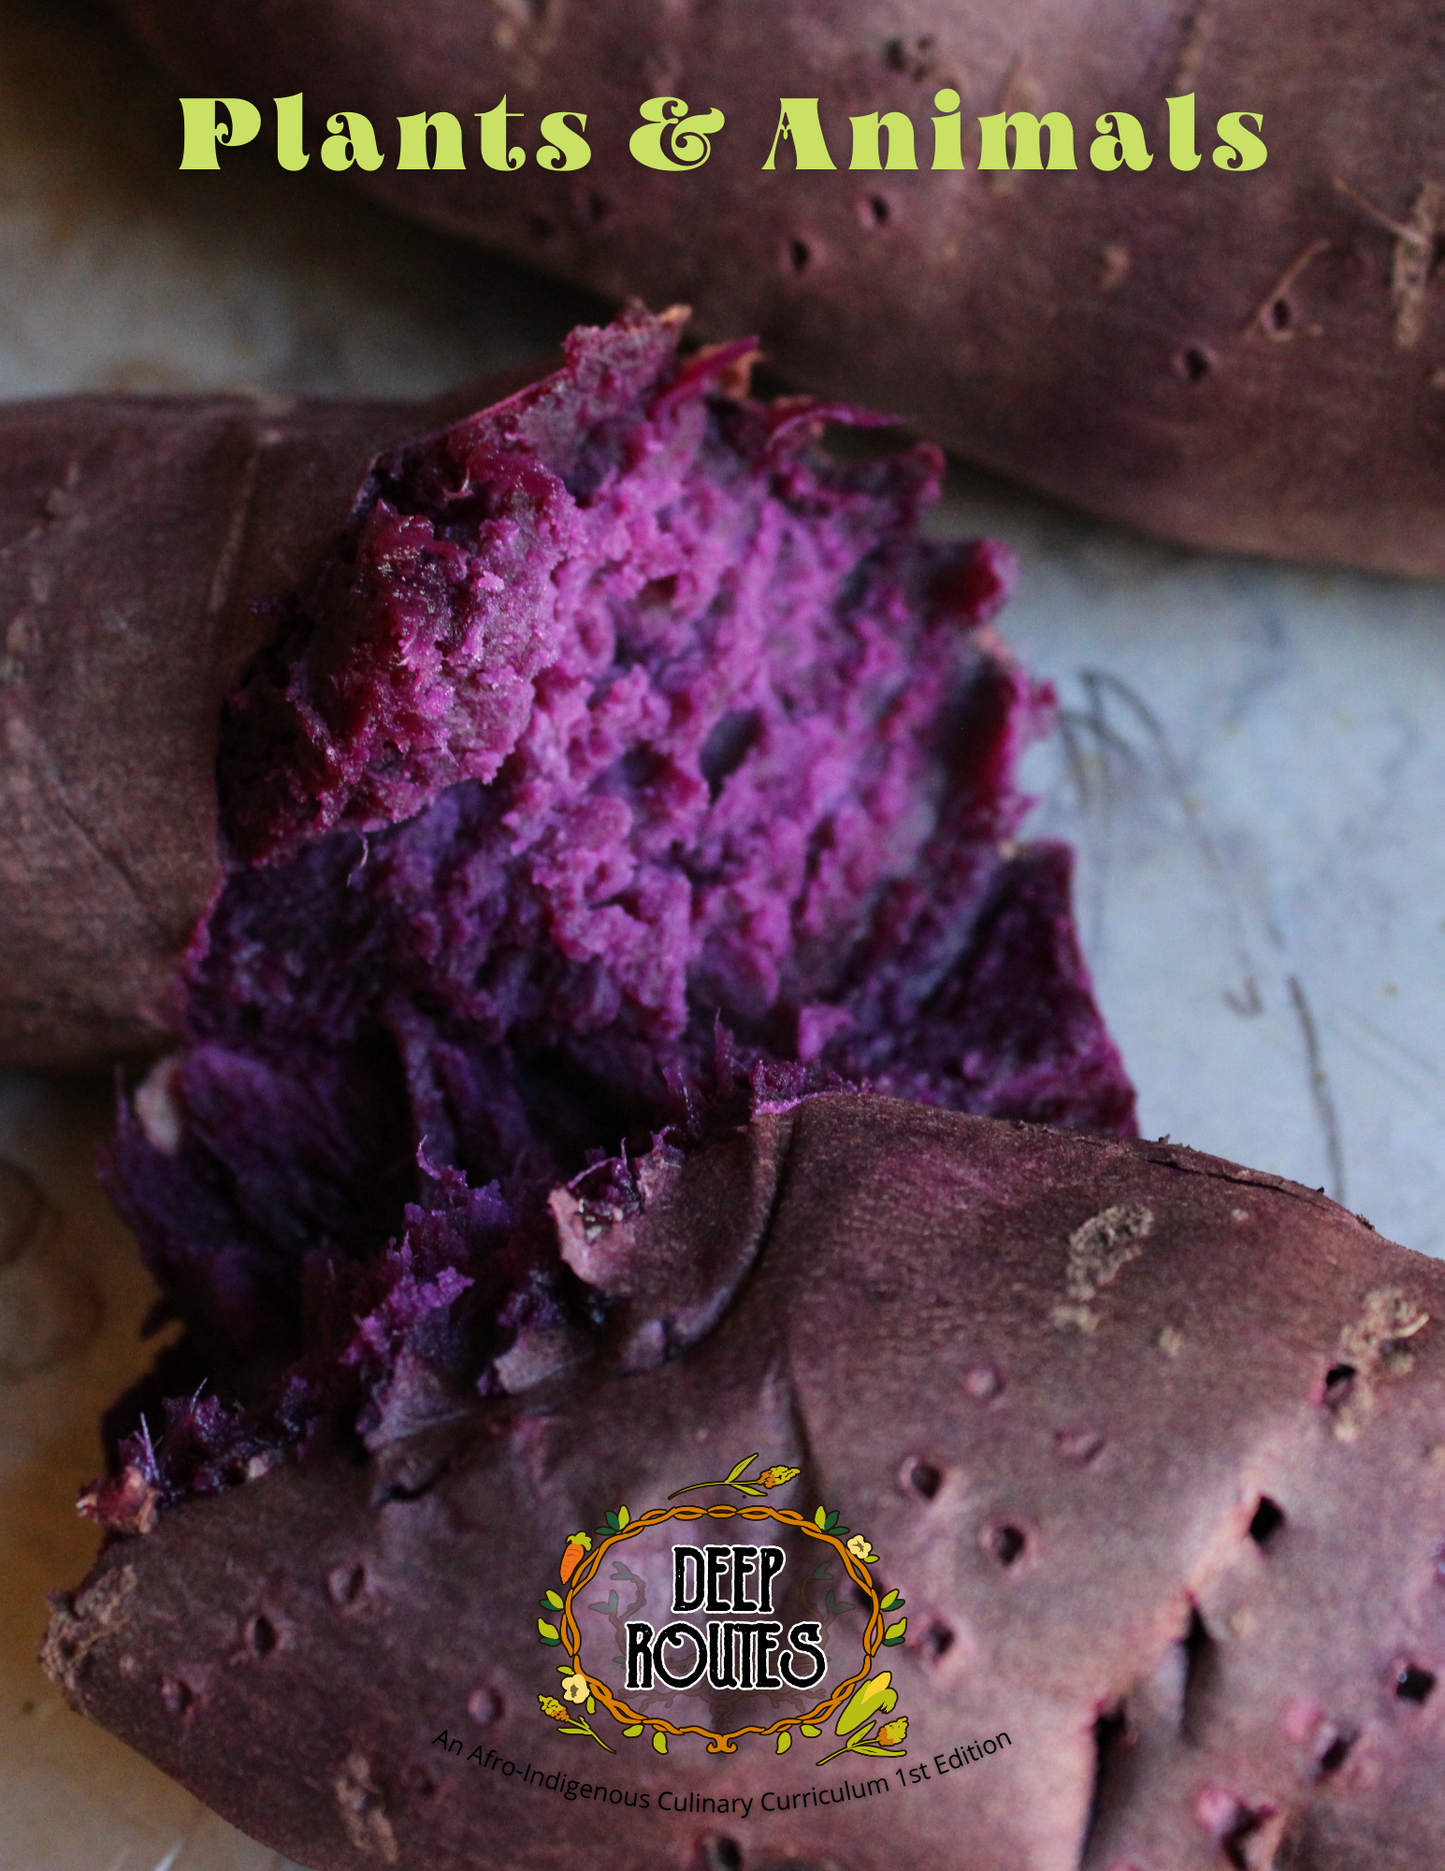 Plants and animals cover with a close up shot of a purple sweet potato.